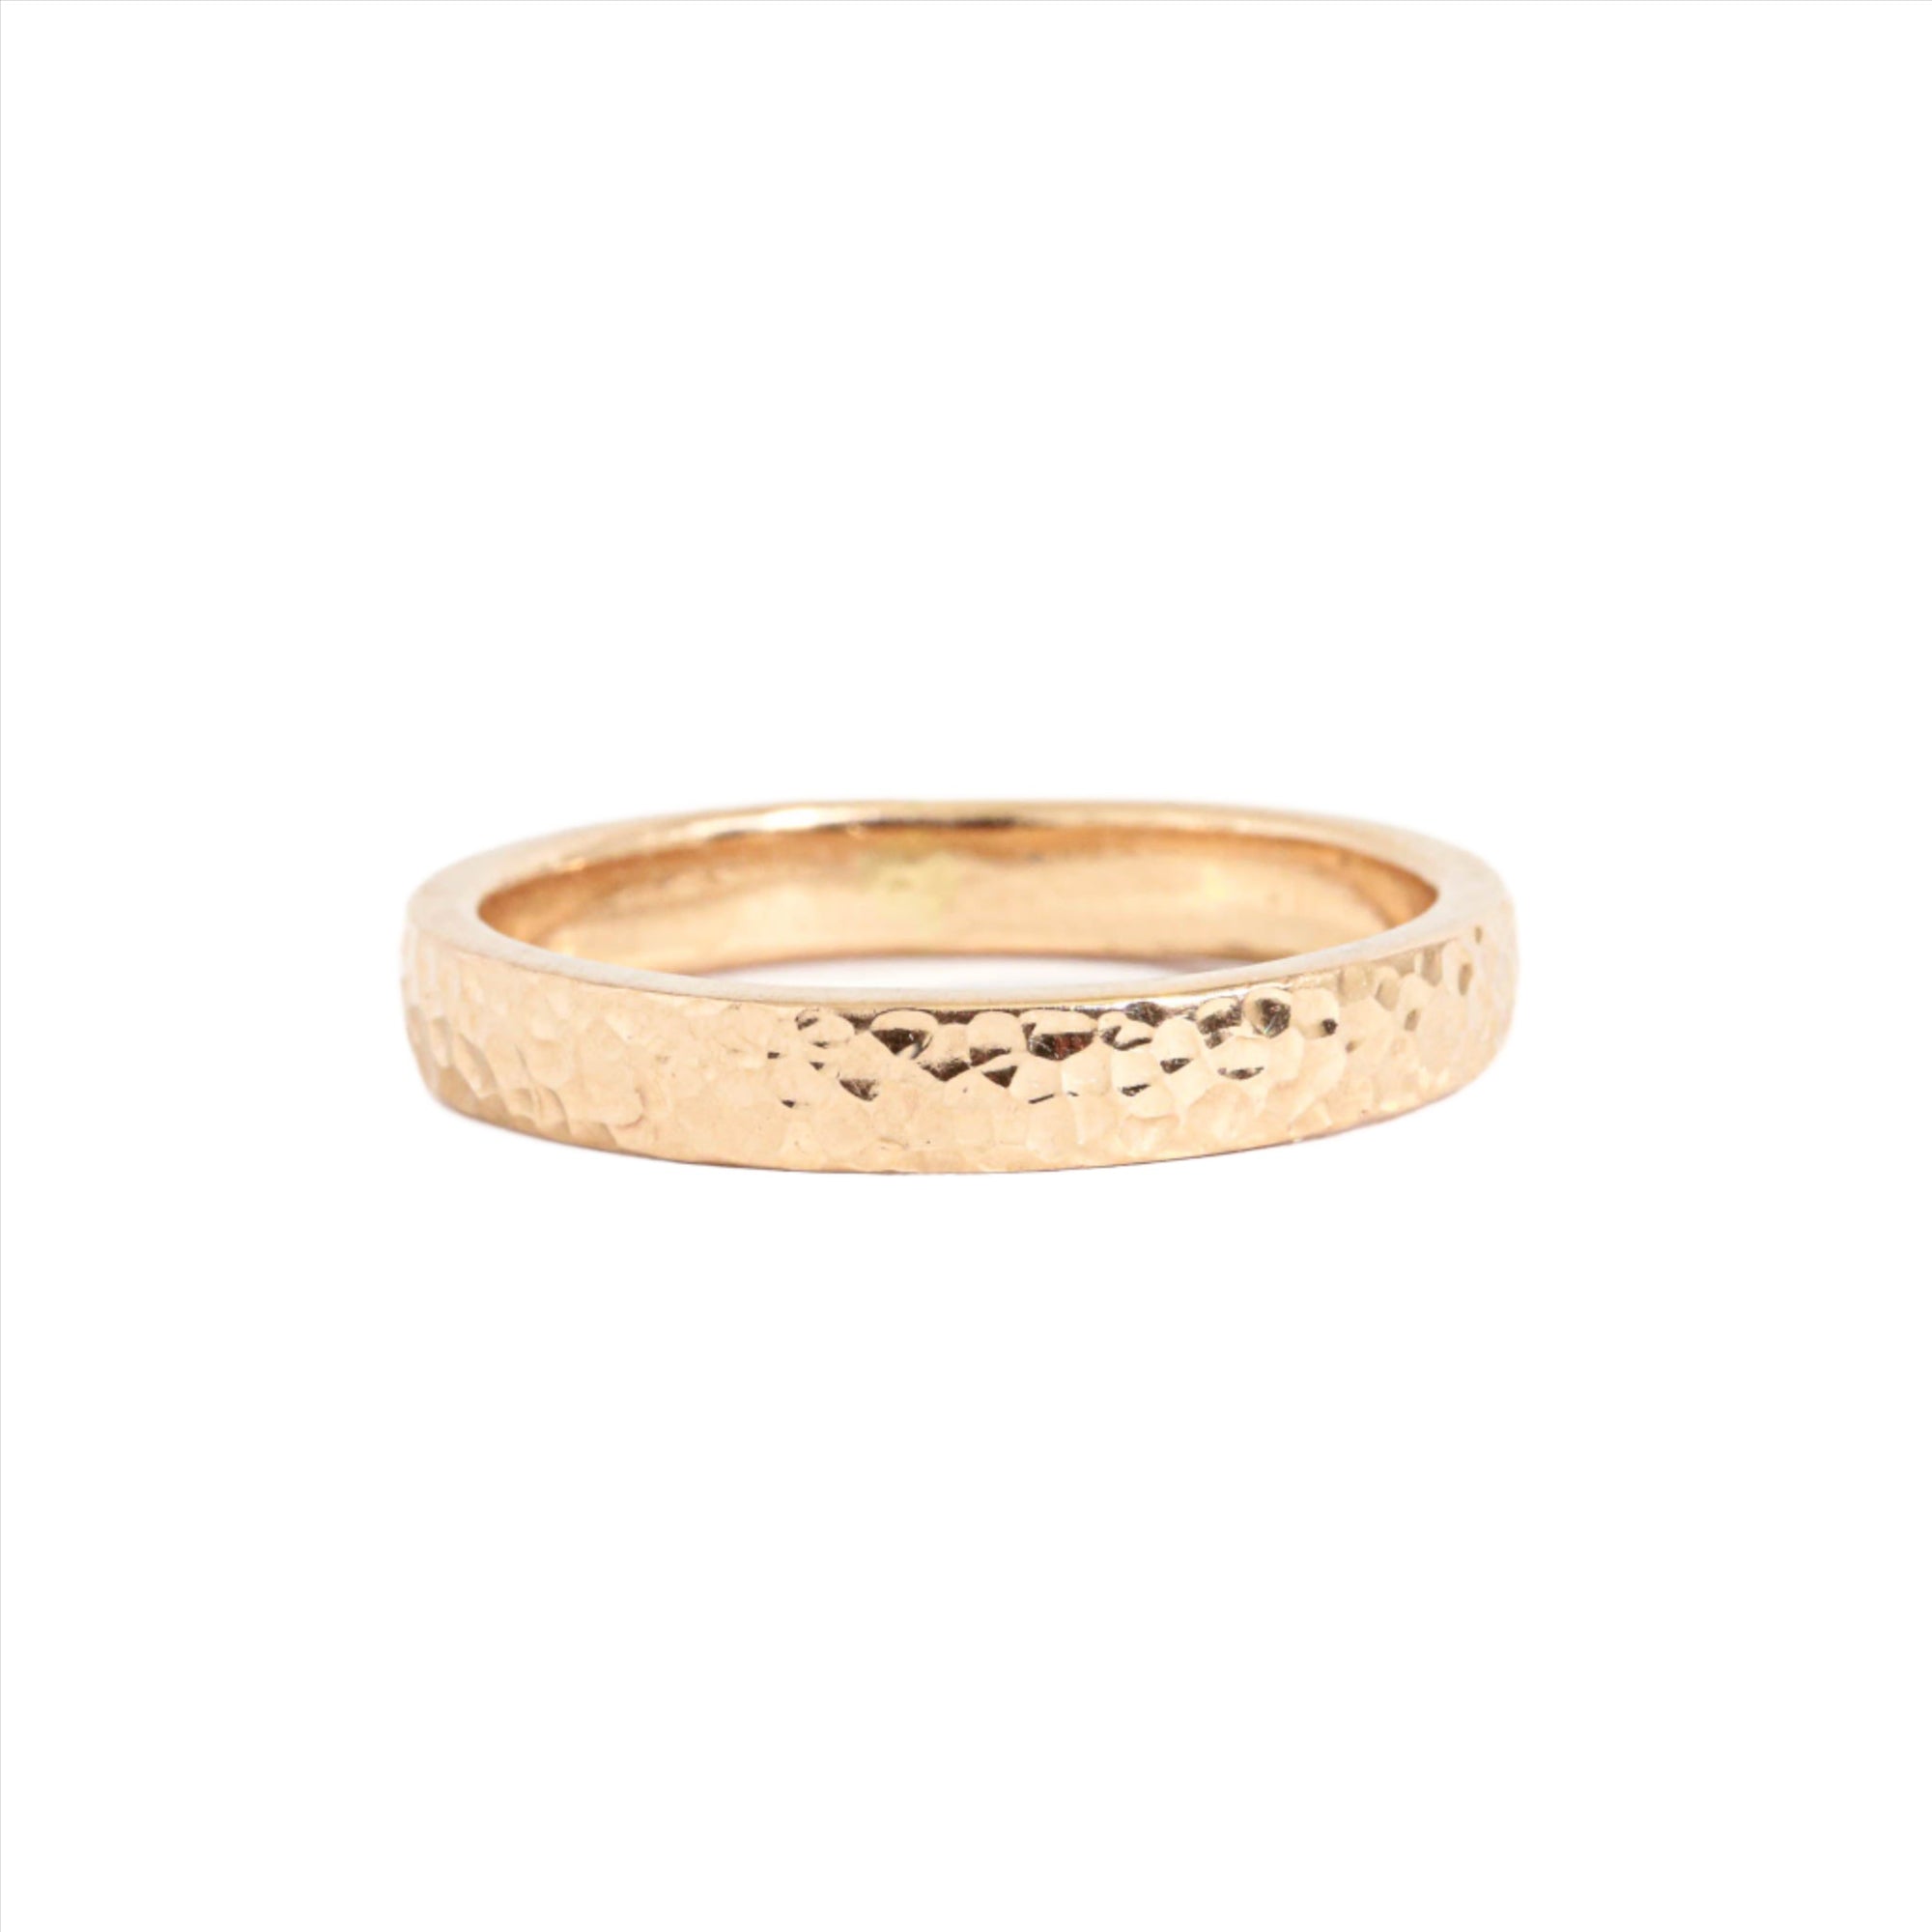 Bespoke textured 18ct rose gold mens wedding band made in Melbourne. 